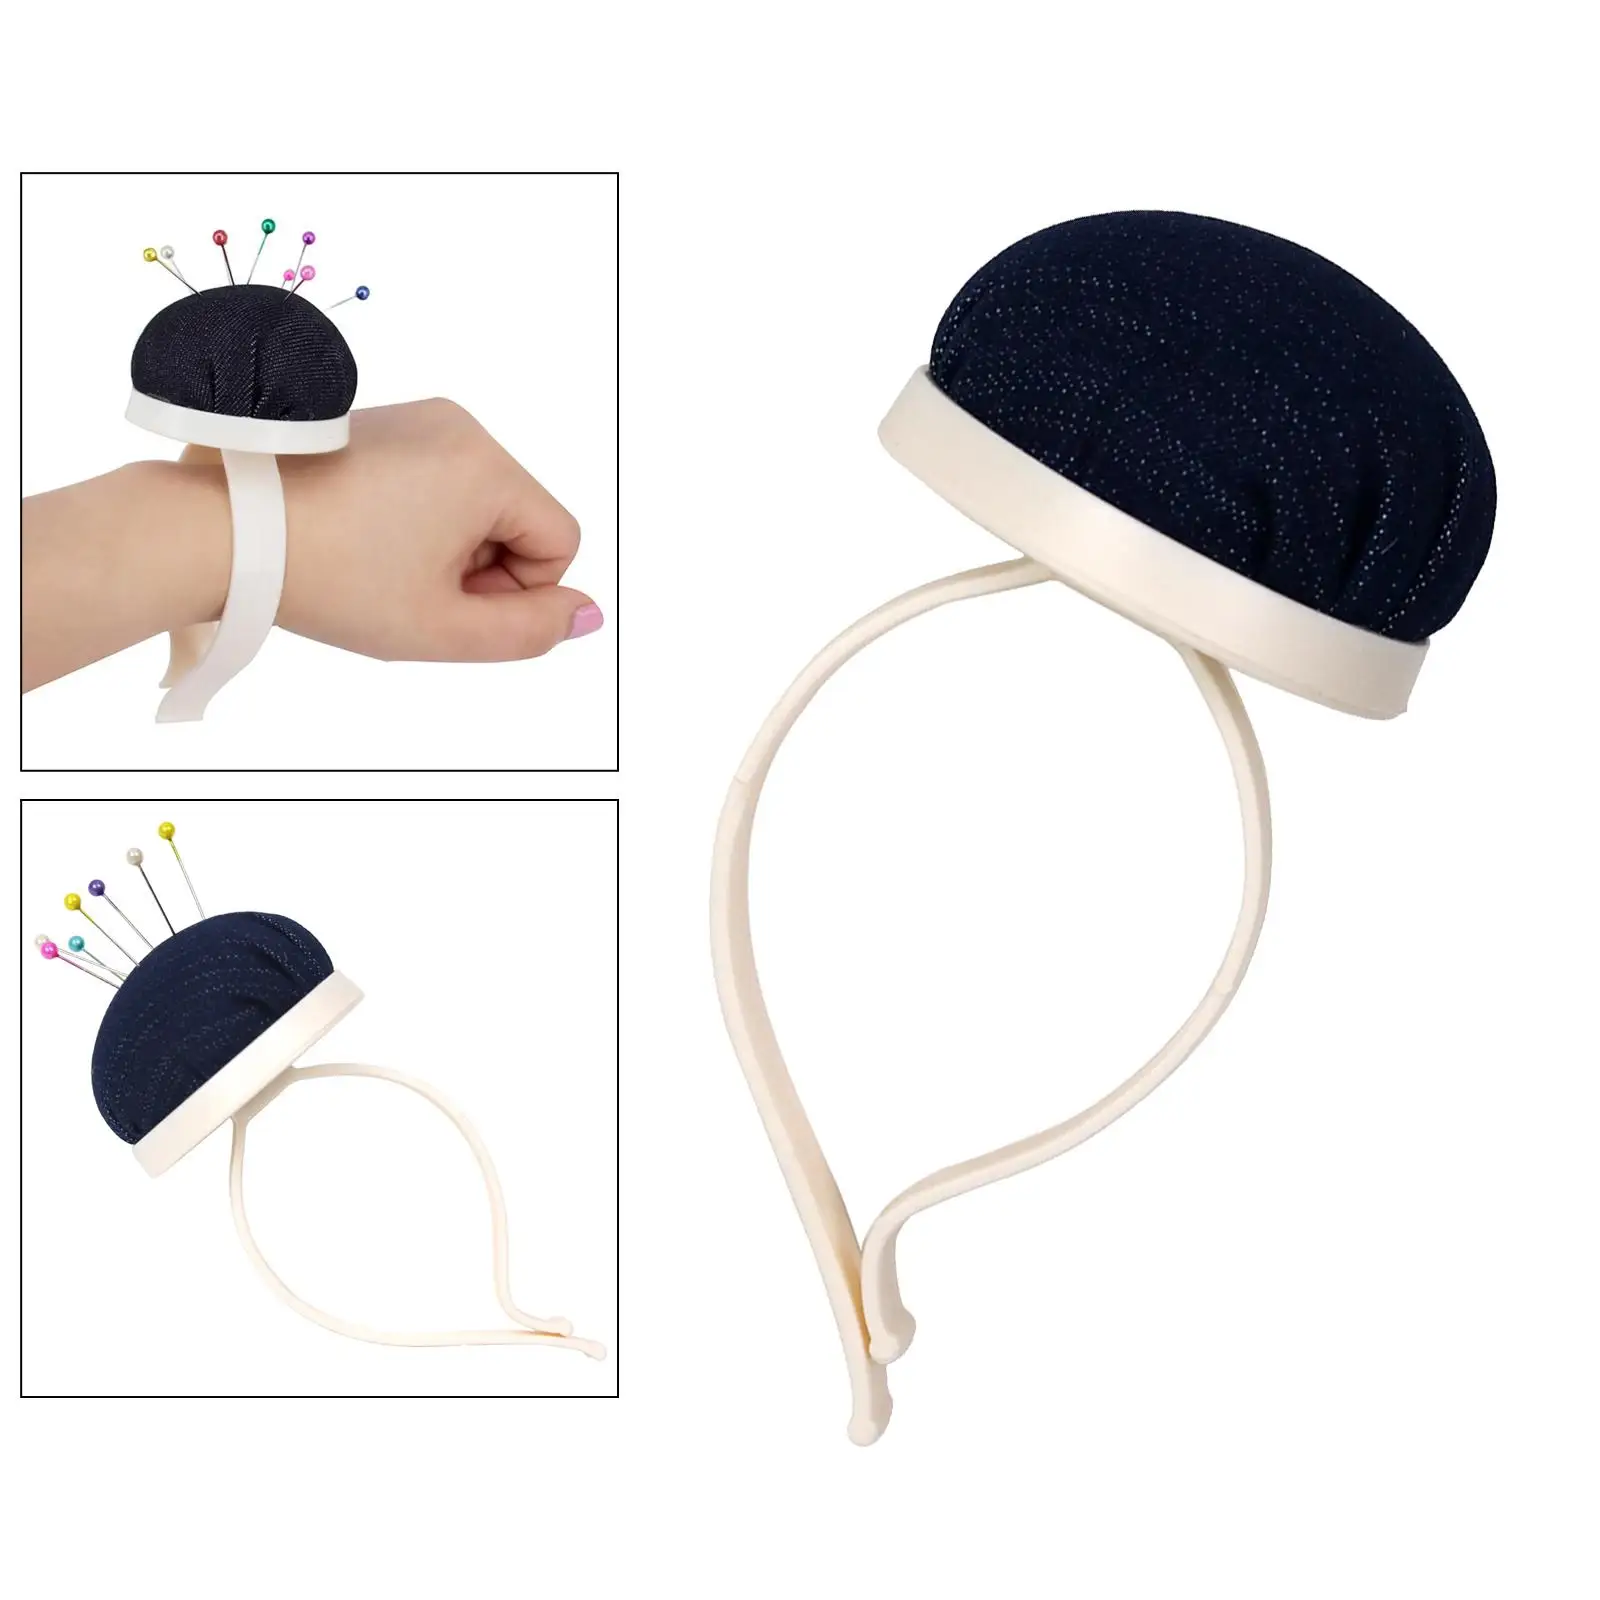 Wrist Wearable cushion Sewing Cushion for Handcraft Needlework Sewing Tool